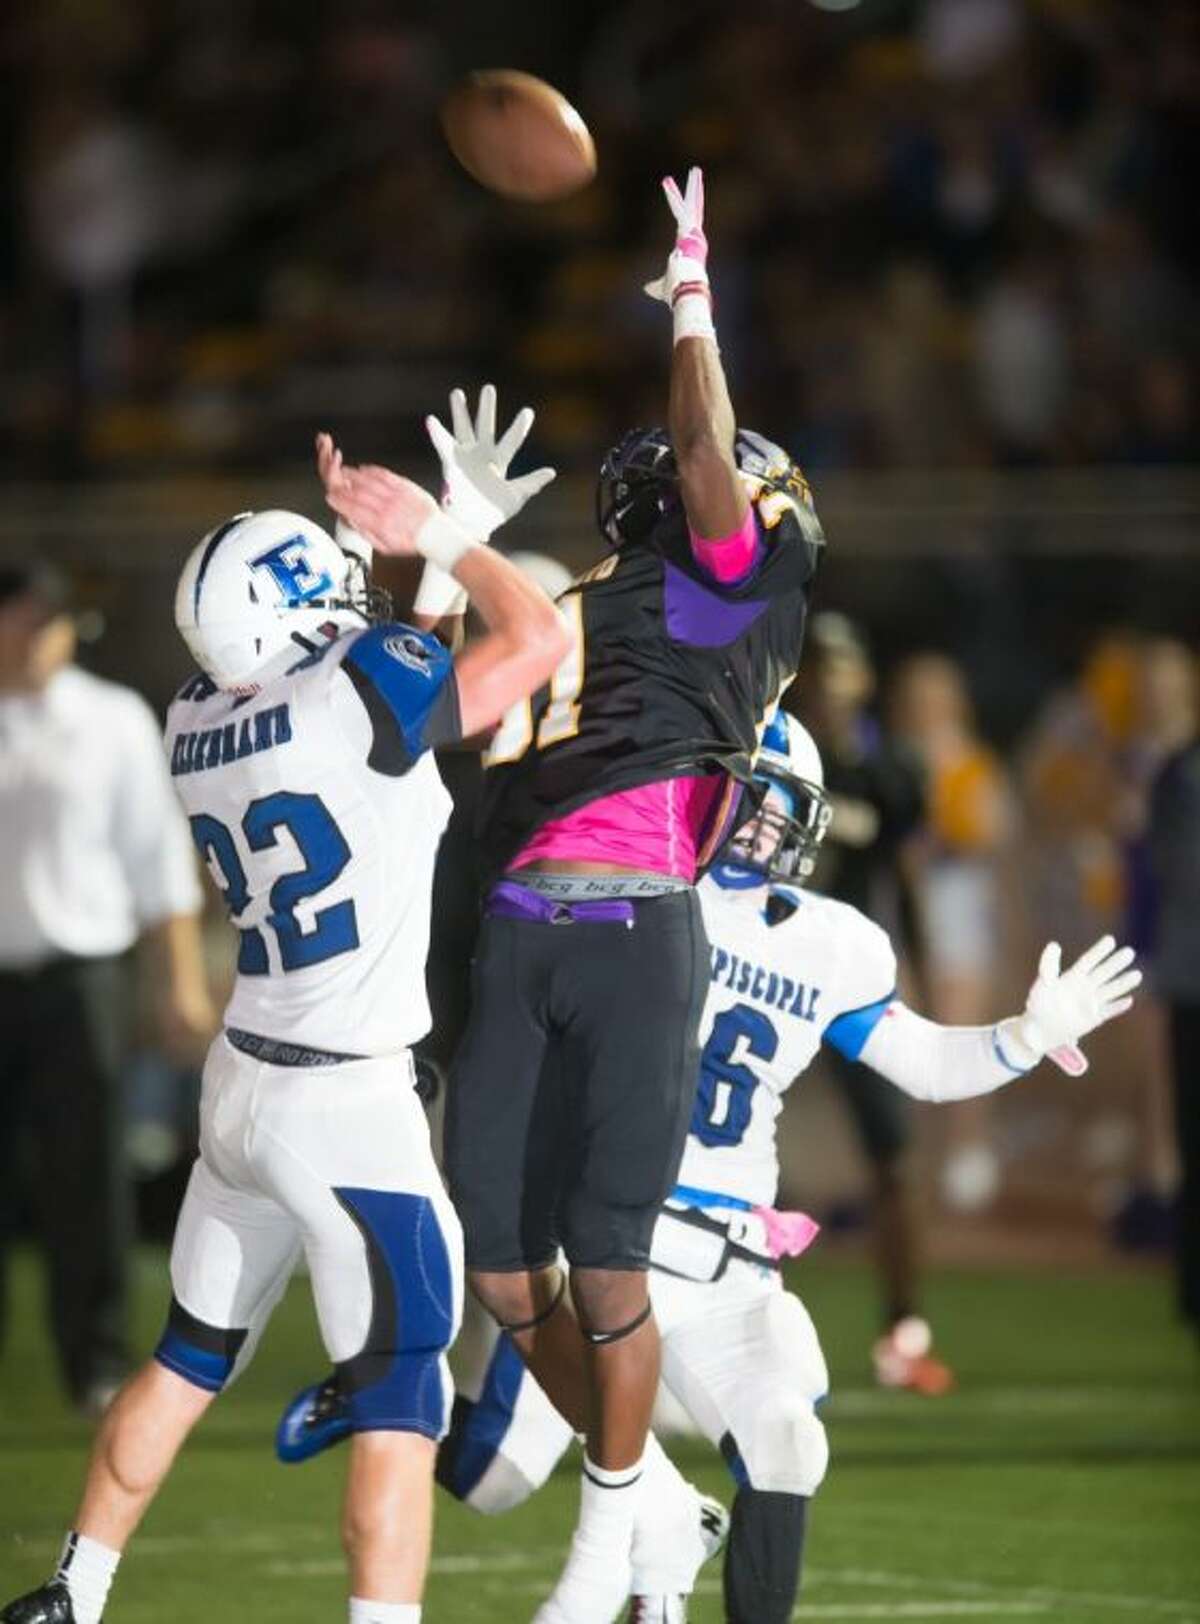 A Kinkaid receiver goes high in the air to pull in a pass with a pair of Episcopal defenders around him during the Falcons’ 20-10 Southwest Preparatory Conference South Zone victory over the Knights Friday evening at rainy Kinkaid School. The Falcons are now 8-0 on the season and will look to finish the regular season unbeaten Friday night when they play St. John’s at Rice Stadium.